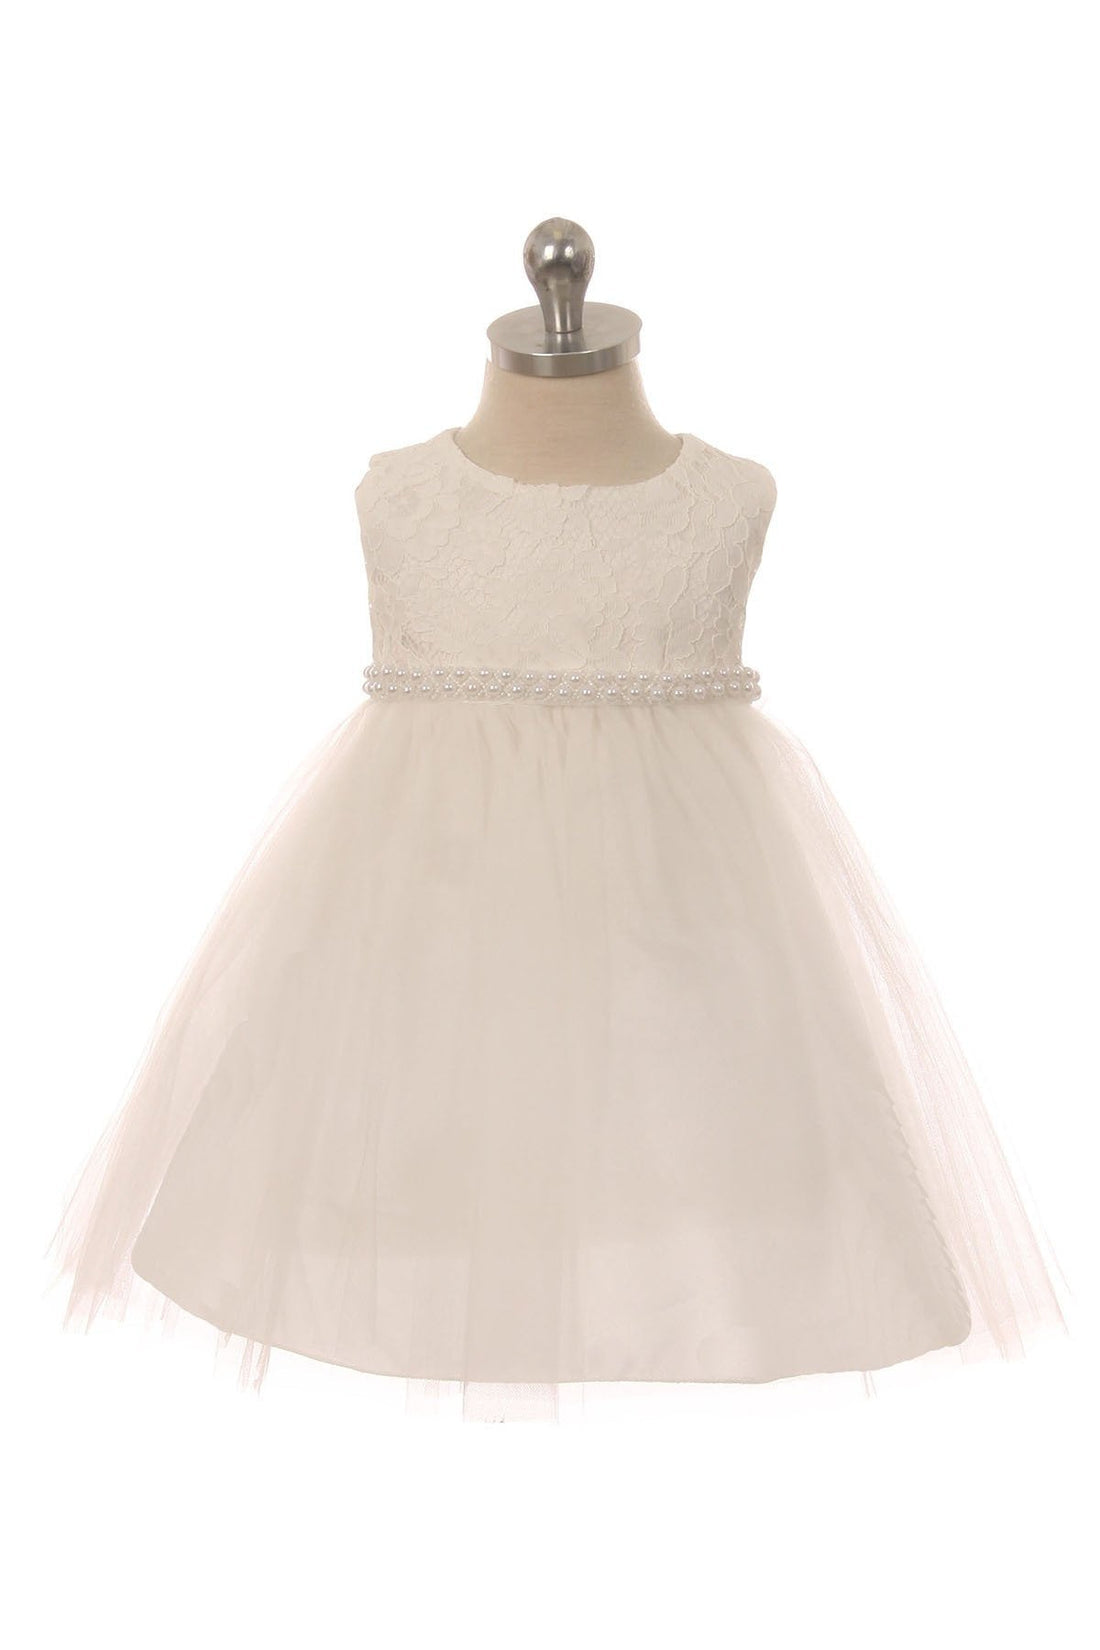 Baby Girl Lace & Thick Pearl Trim Party Dress - AS456B-C Kids Dream